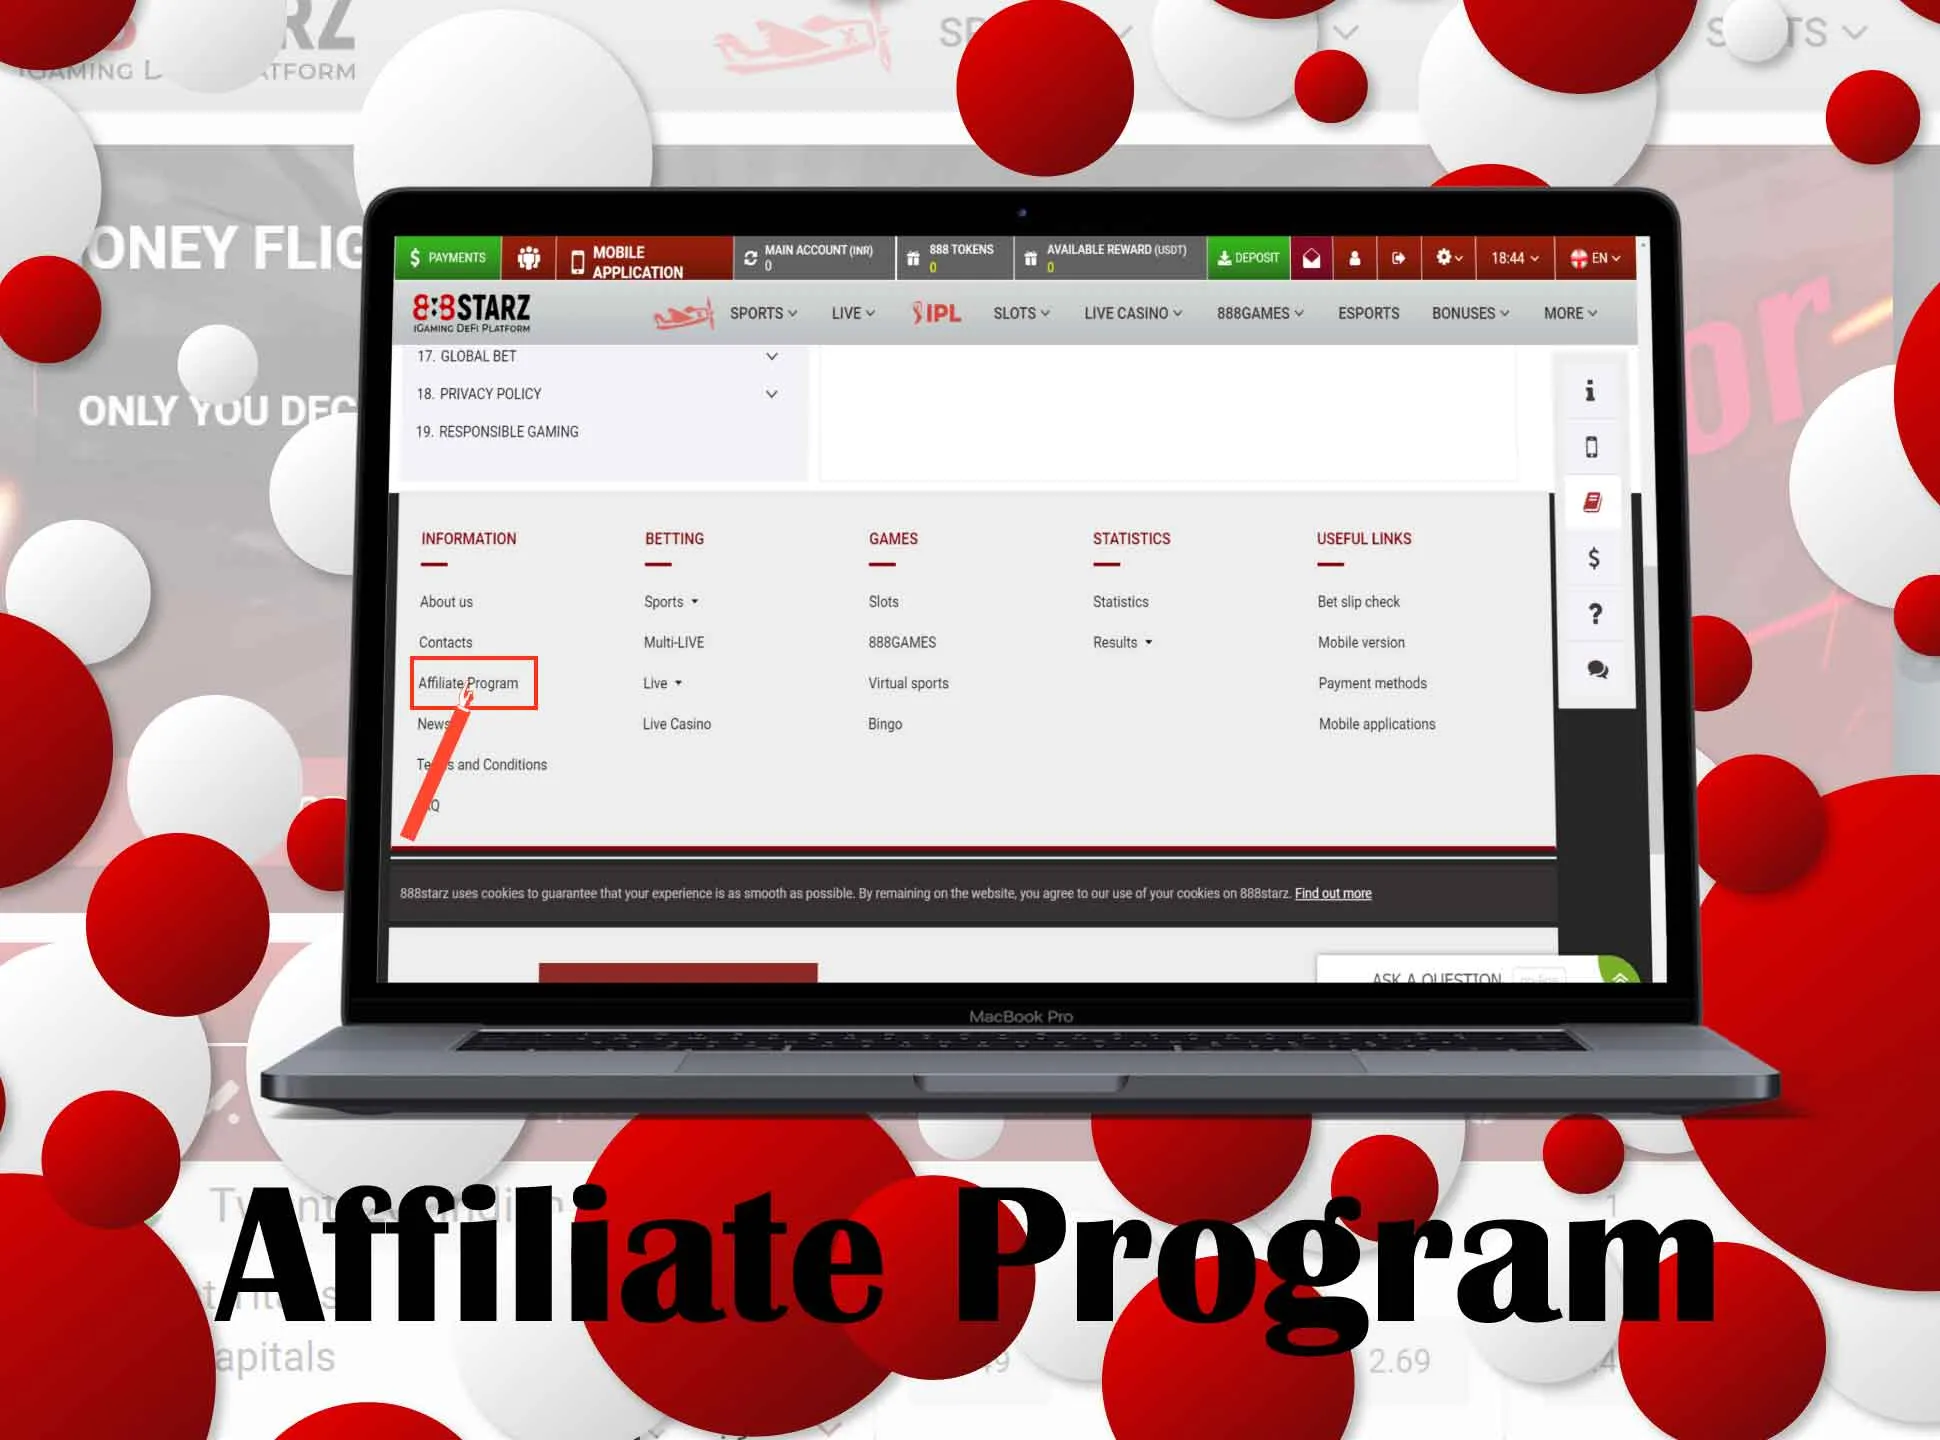 Join the 888starz affiliate program to get additional benefits and bonuses.